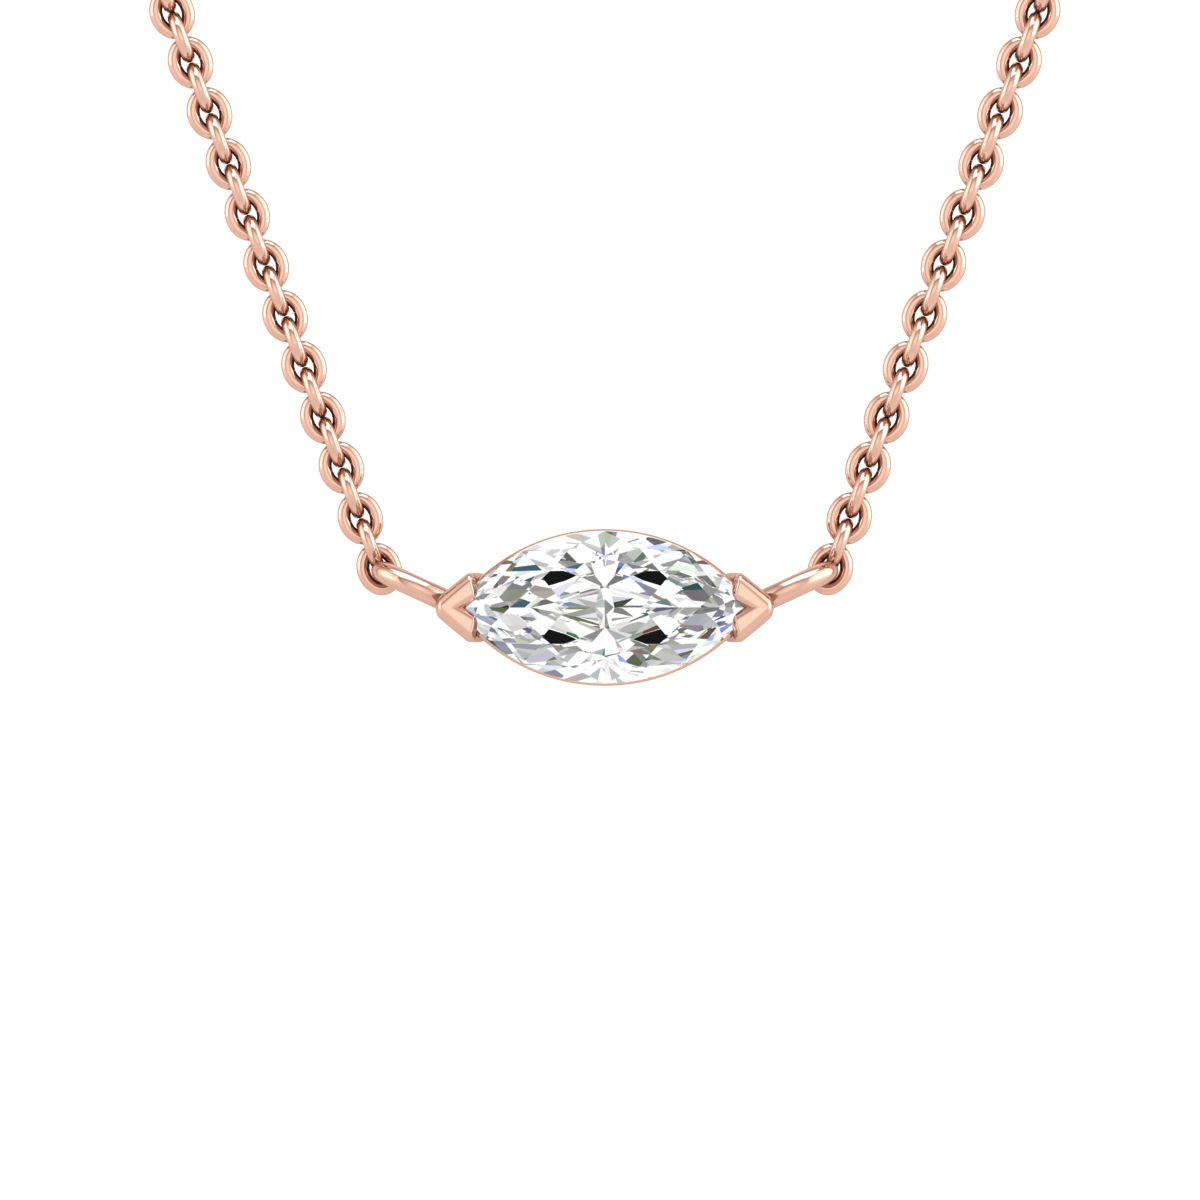 1/2 to 5 Carat Lab Created Round Cut Diamond Solitaire Pendant Necklace 14K  Gold | eBay